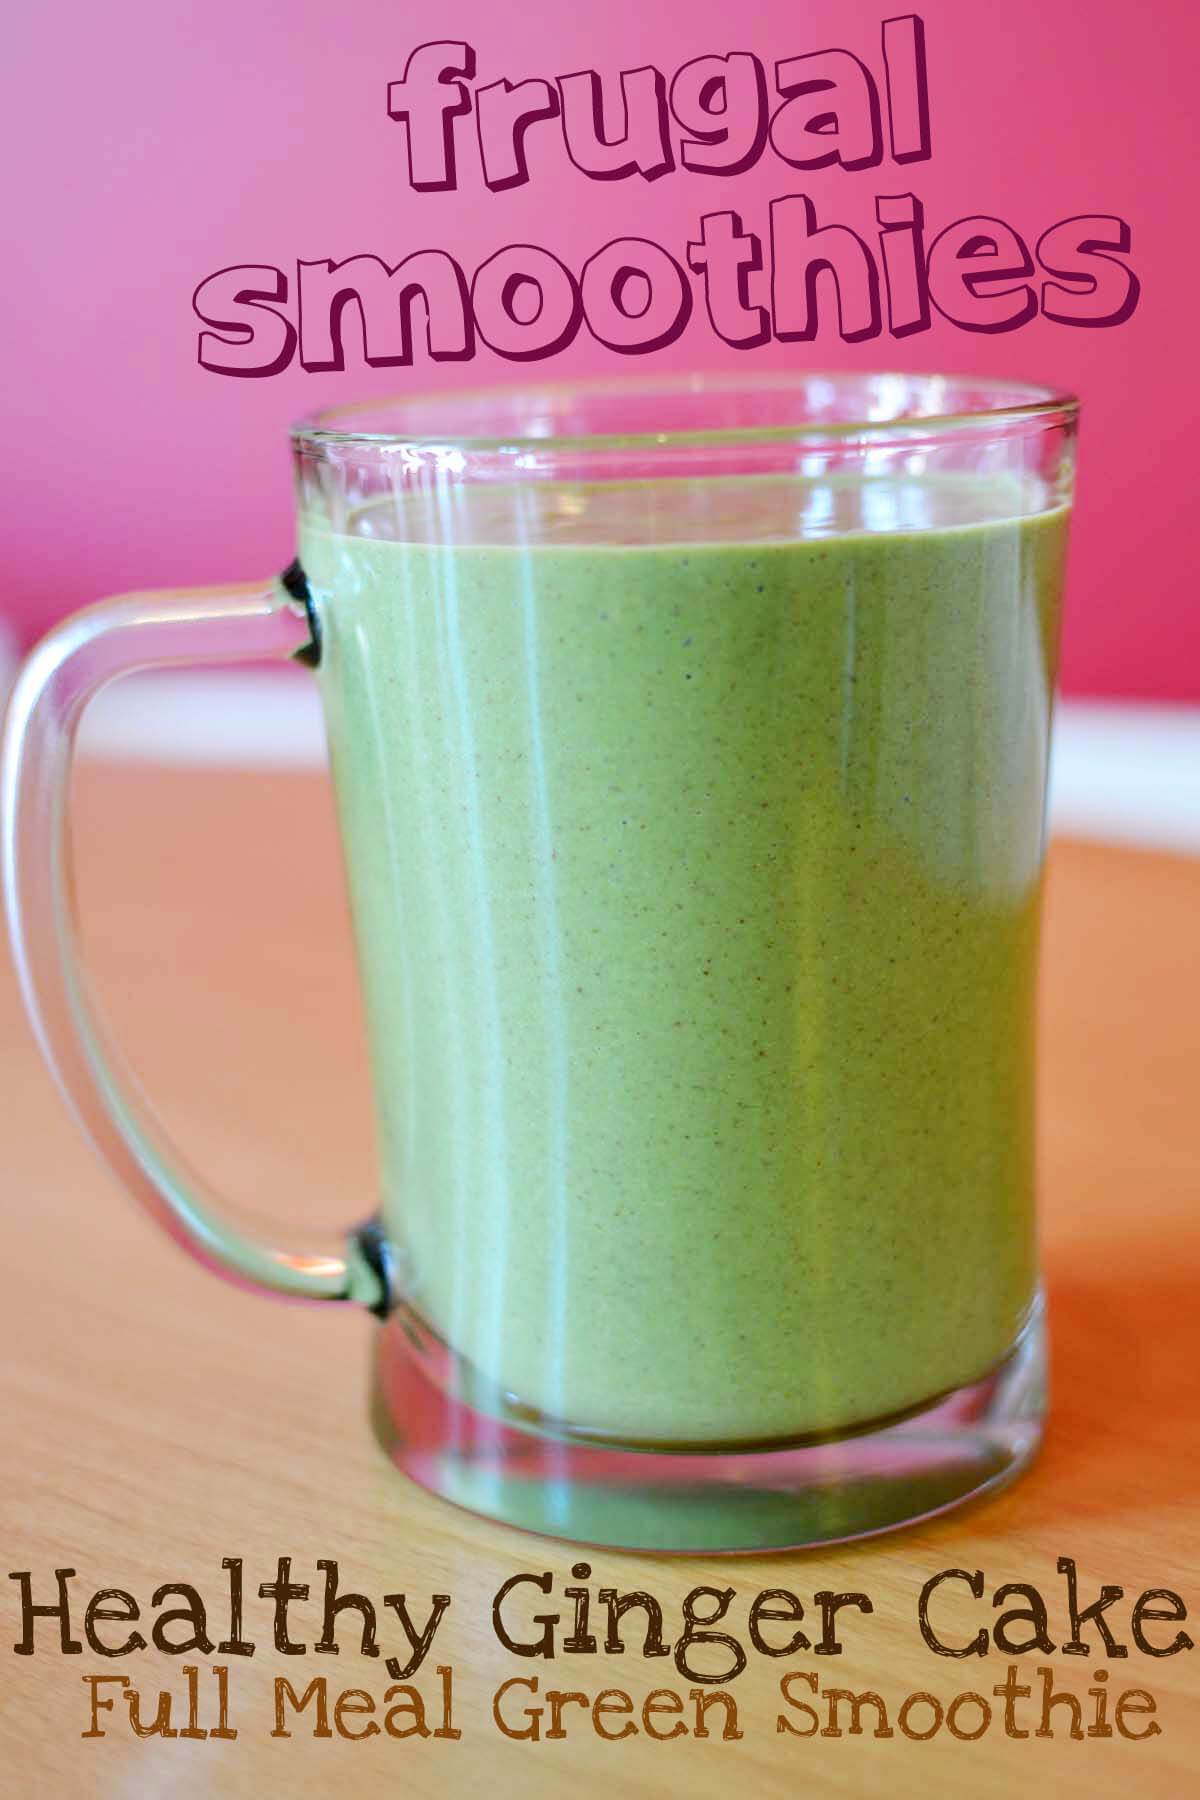 Cheap Smoothies Ginger Cake Full Meal Green Smoothies